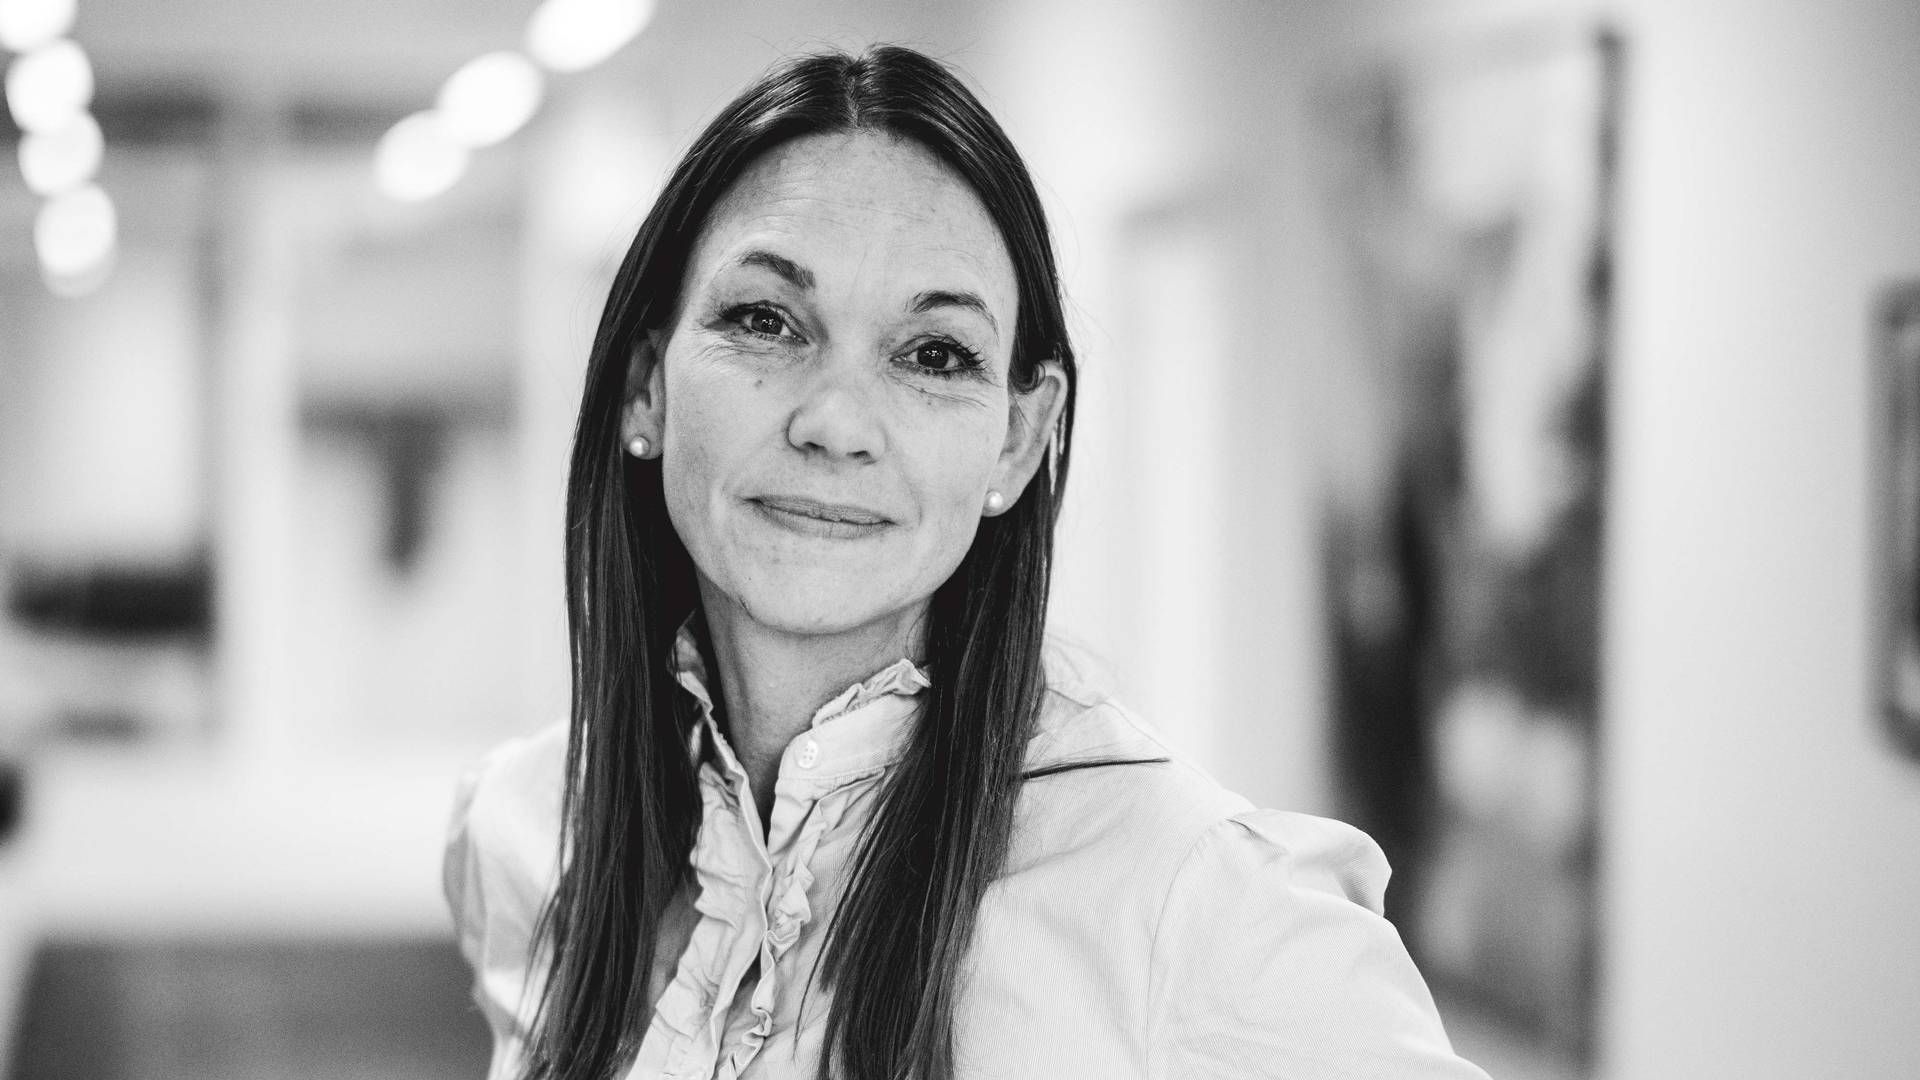 "Here, the decision-making structure is somewhat flatter, and those who have the skills also make the decisions and take the responsibility that comes with it," says Anette Sejdelin about her job change from Jyske Capital to Investering & Tryghed. | Photo: Michael Drost Hansen